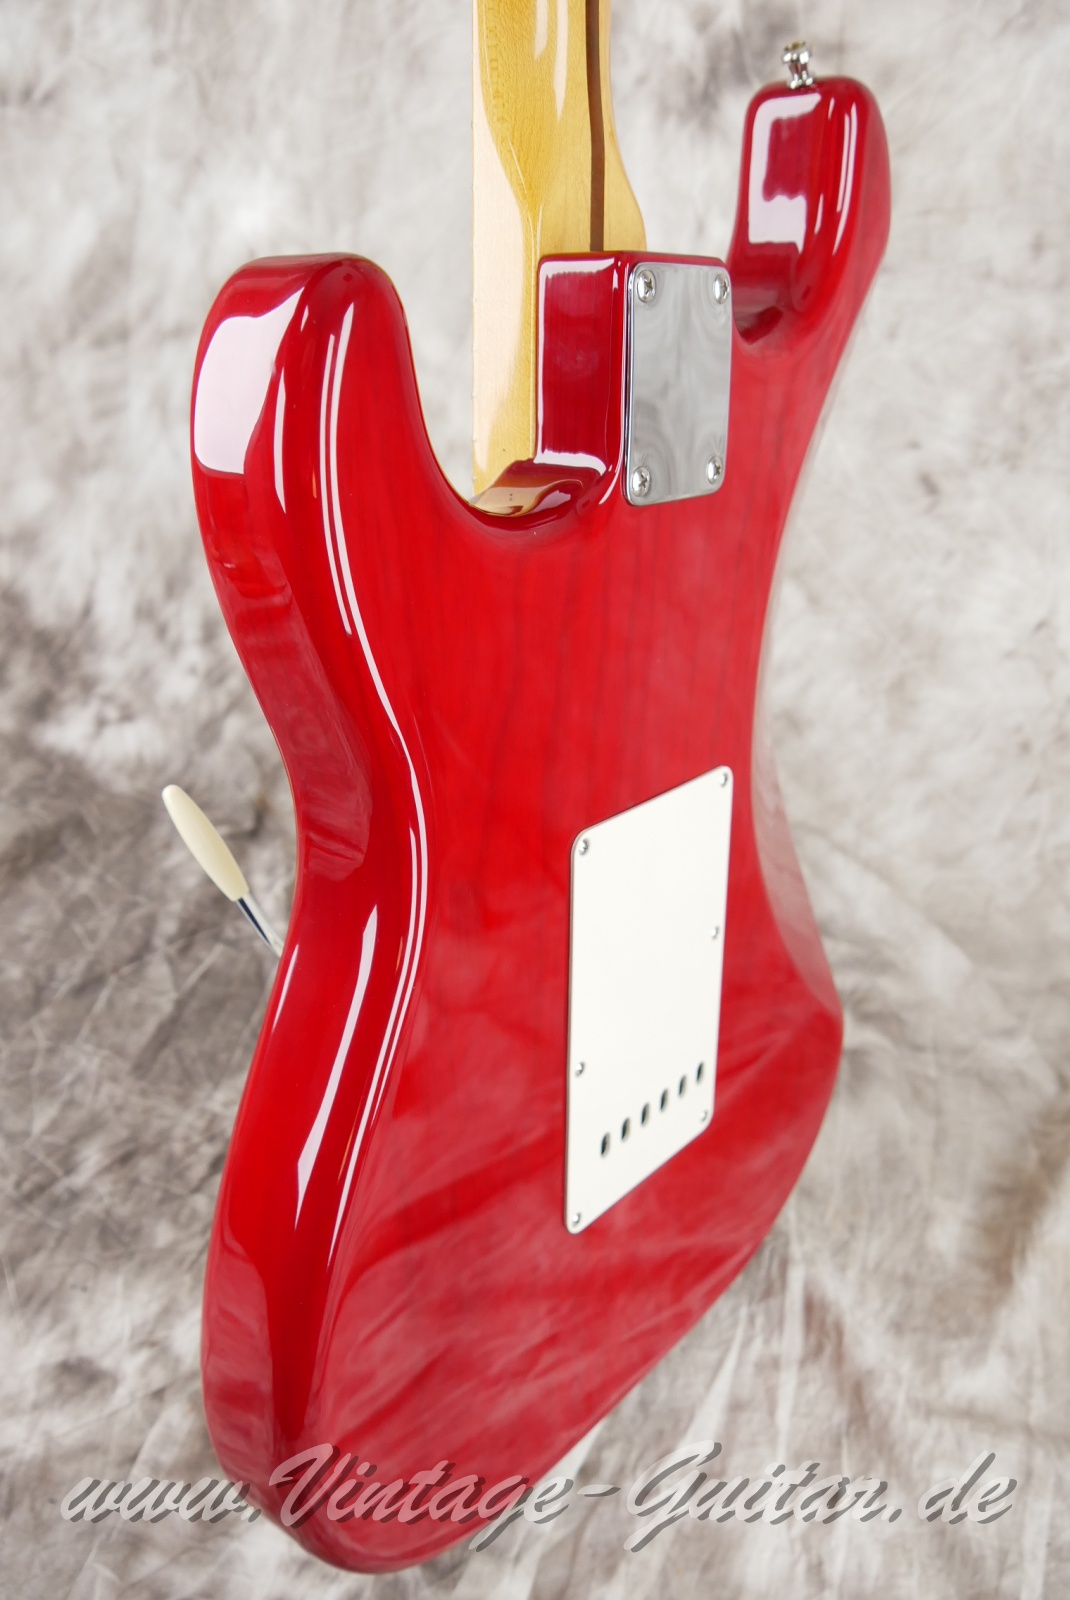 img/vintage/5650/Fender_Stratocaster_classic_50s_Mexico_transparent_red_2010-011.JPG